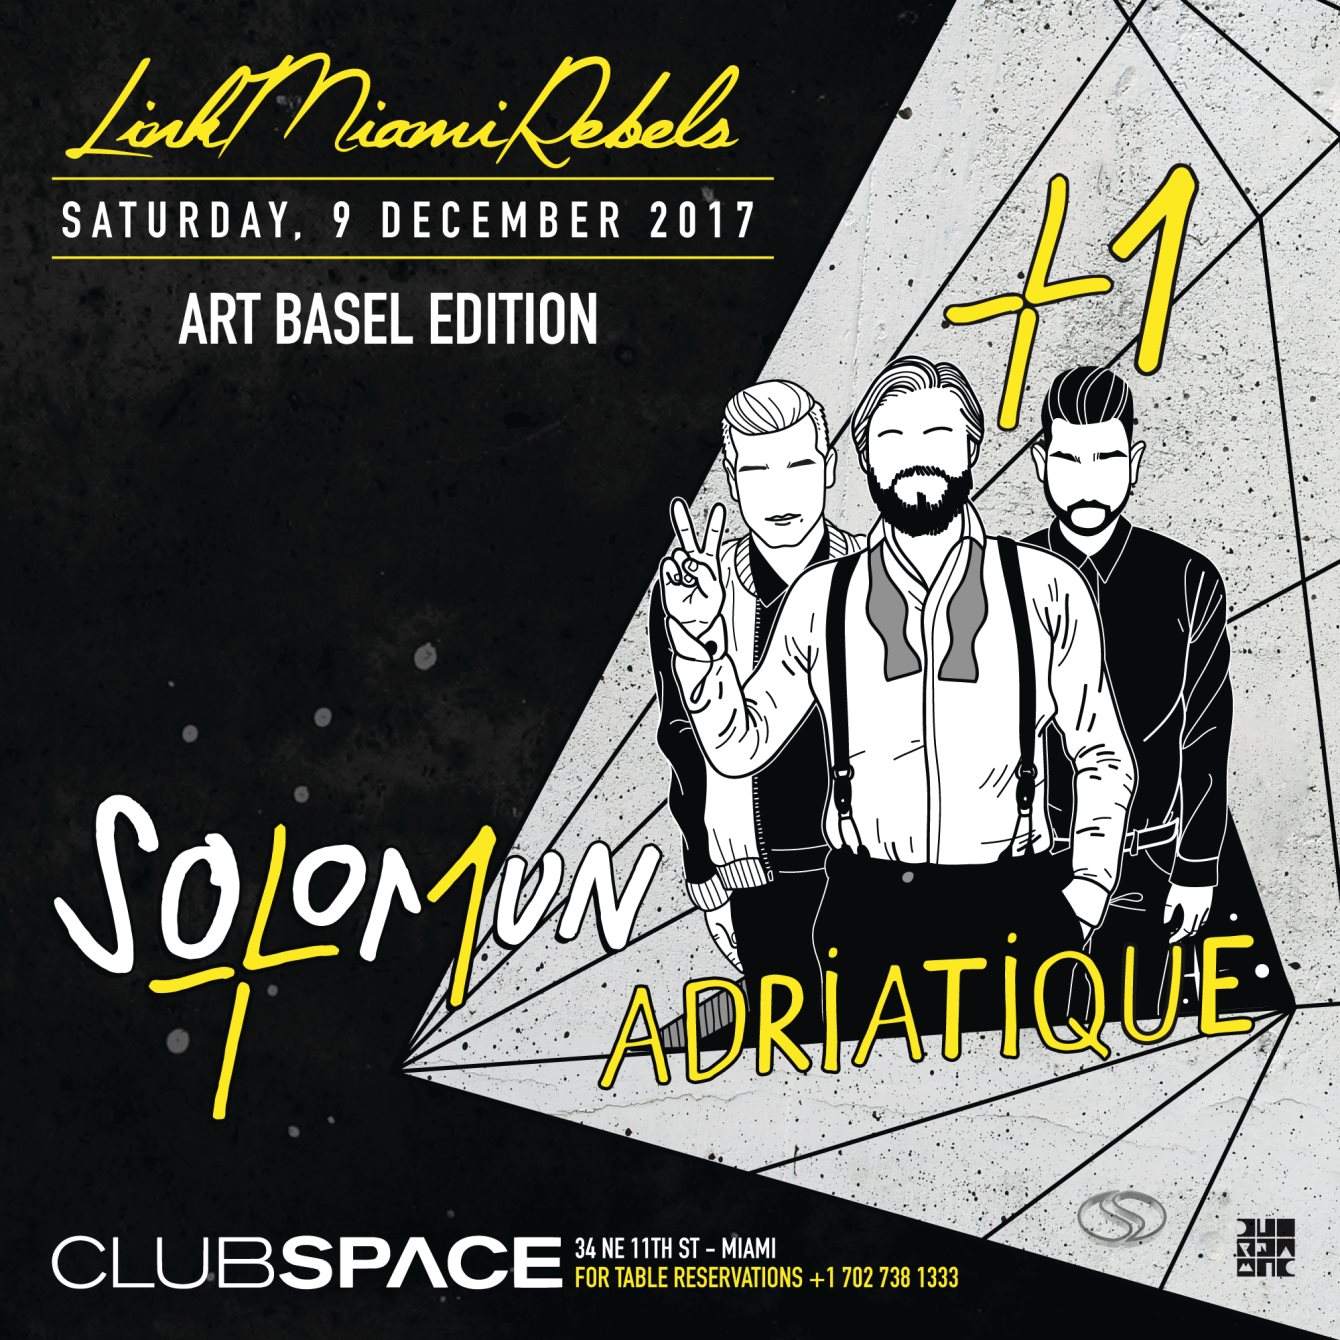 Solomun +1 with Adriatique by Link Miami Rebels - Art Basel Edition - Página frontal